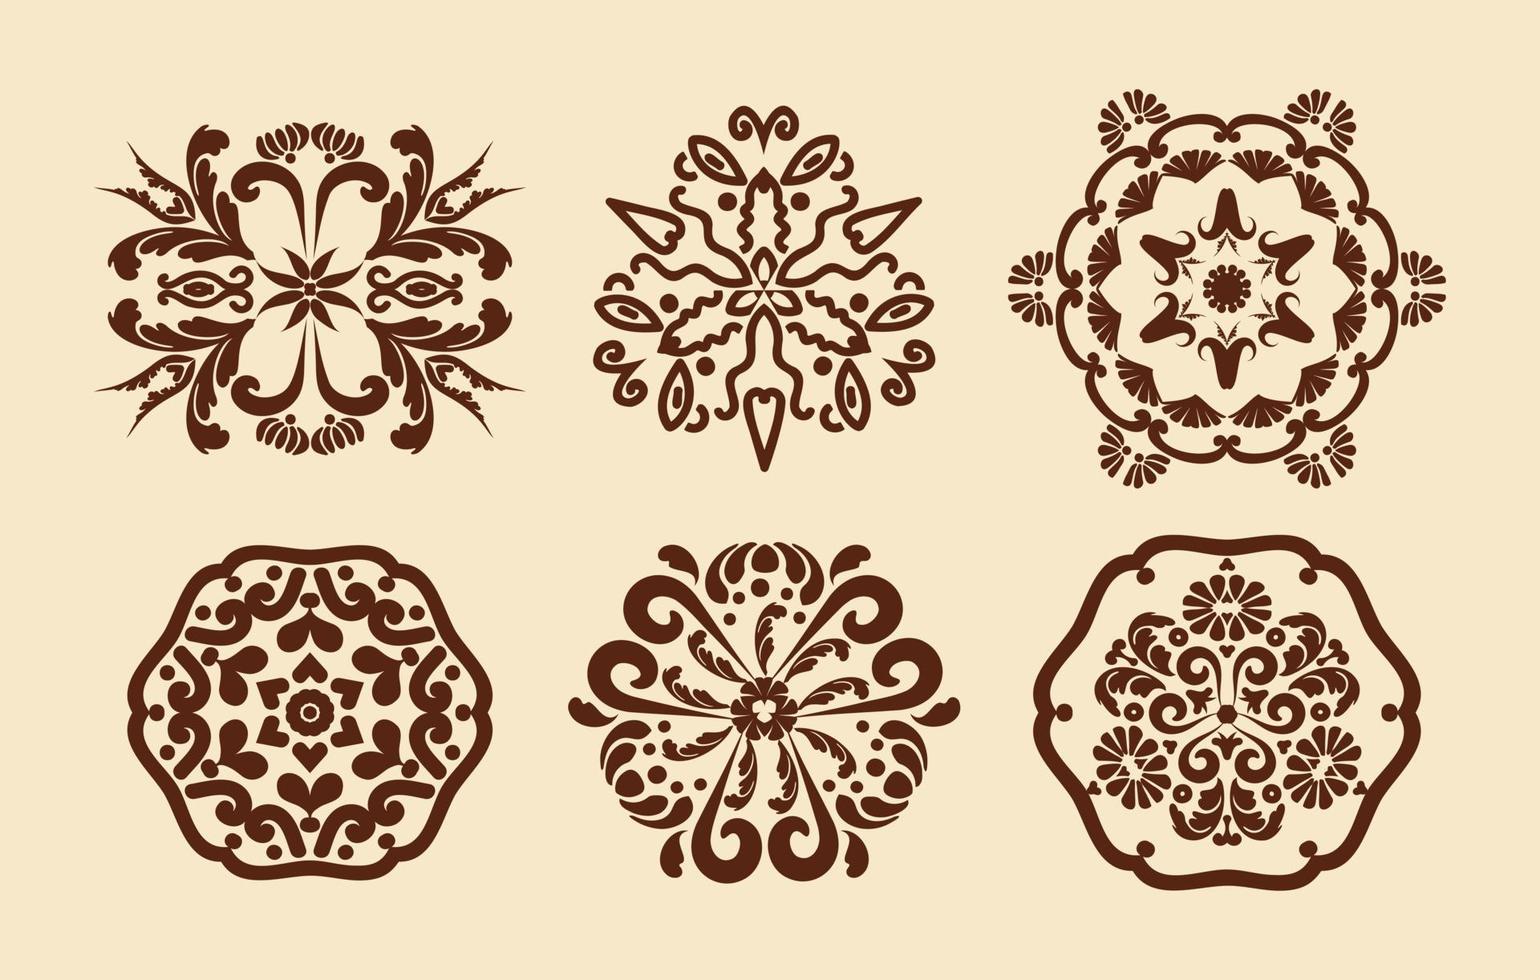 Floral patterns of mandalas. Mehndi pattern. Decorative texture. Brown, beige color. For the design of wall, menus, wedding invitations or labels, for laser cutting, marquetry. vector